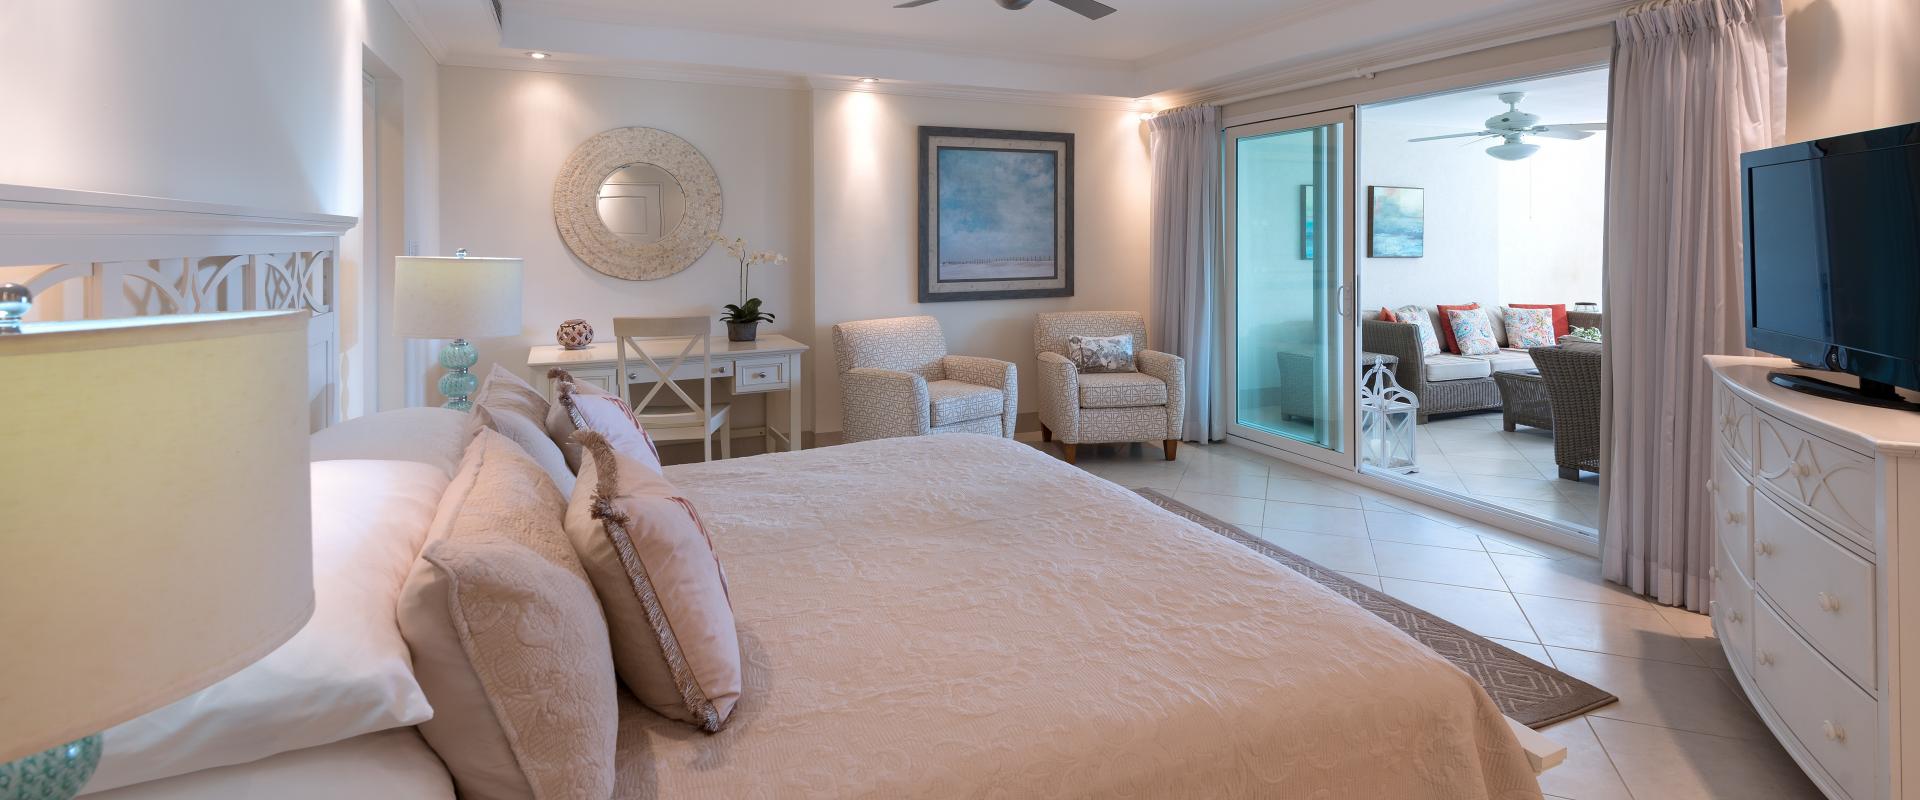 Palm Beach 204 Barbados Beachfront Condo Rental Master Bedroom with King Bed